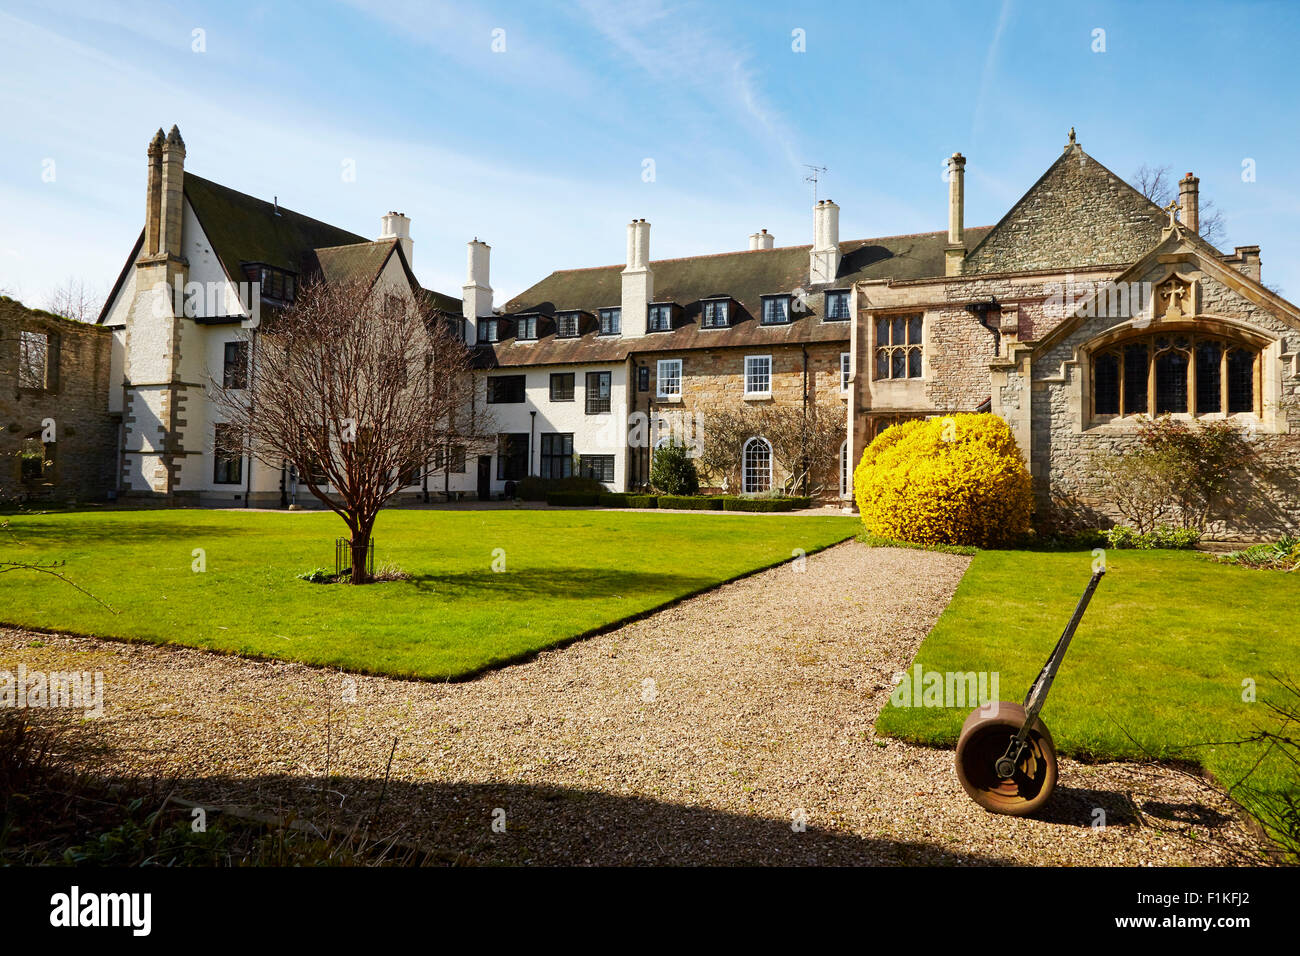 View of the gardens and buildings of the Archbishop's Palace in Southwell, Nottinghamshire, England, UK. Stock Photo